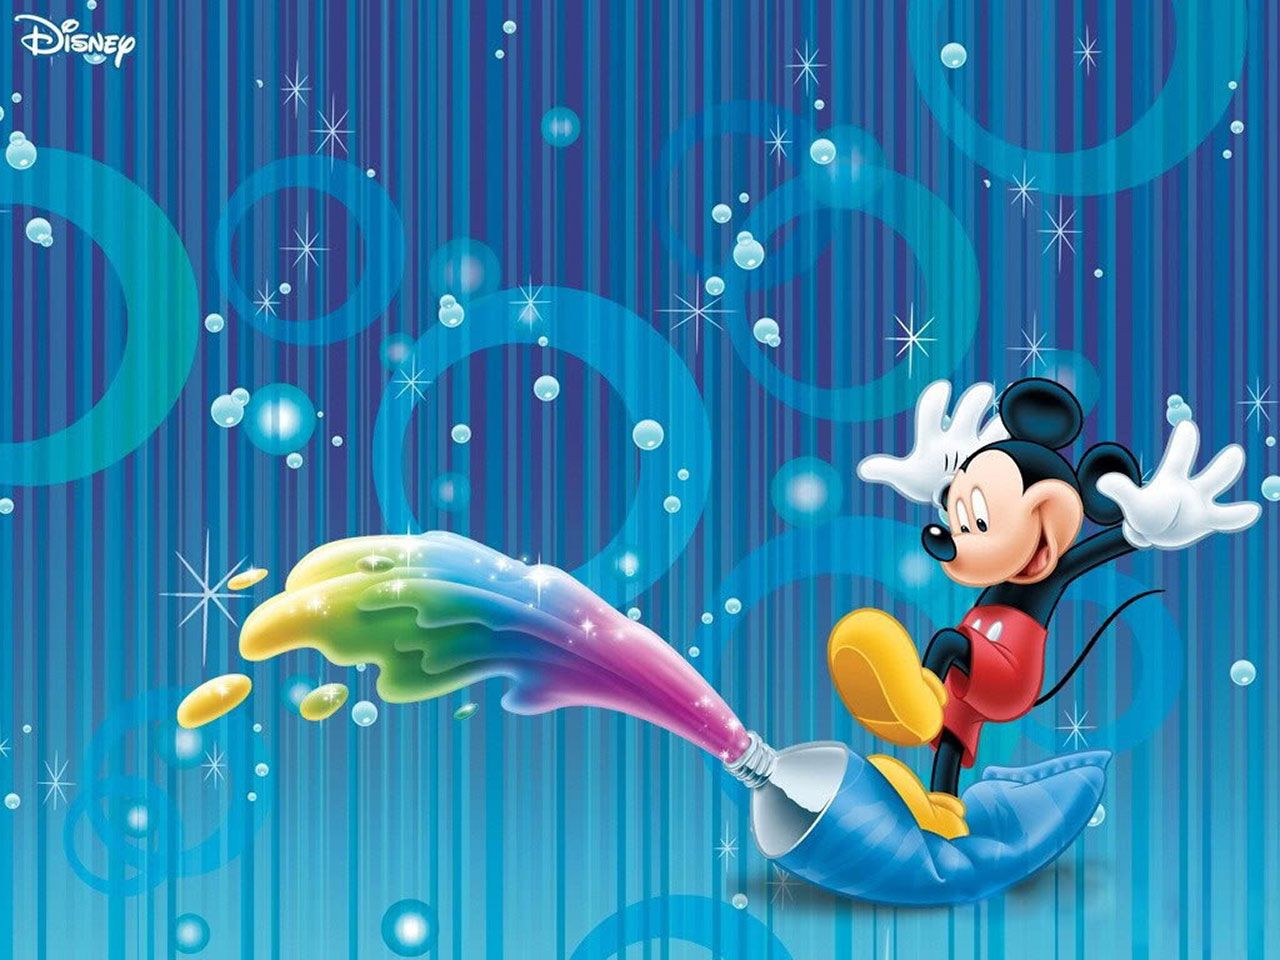 Mickey Mouse wallpaper hd free download